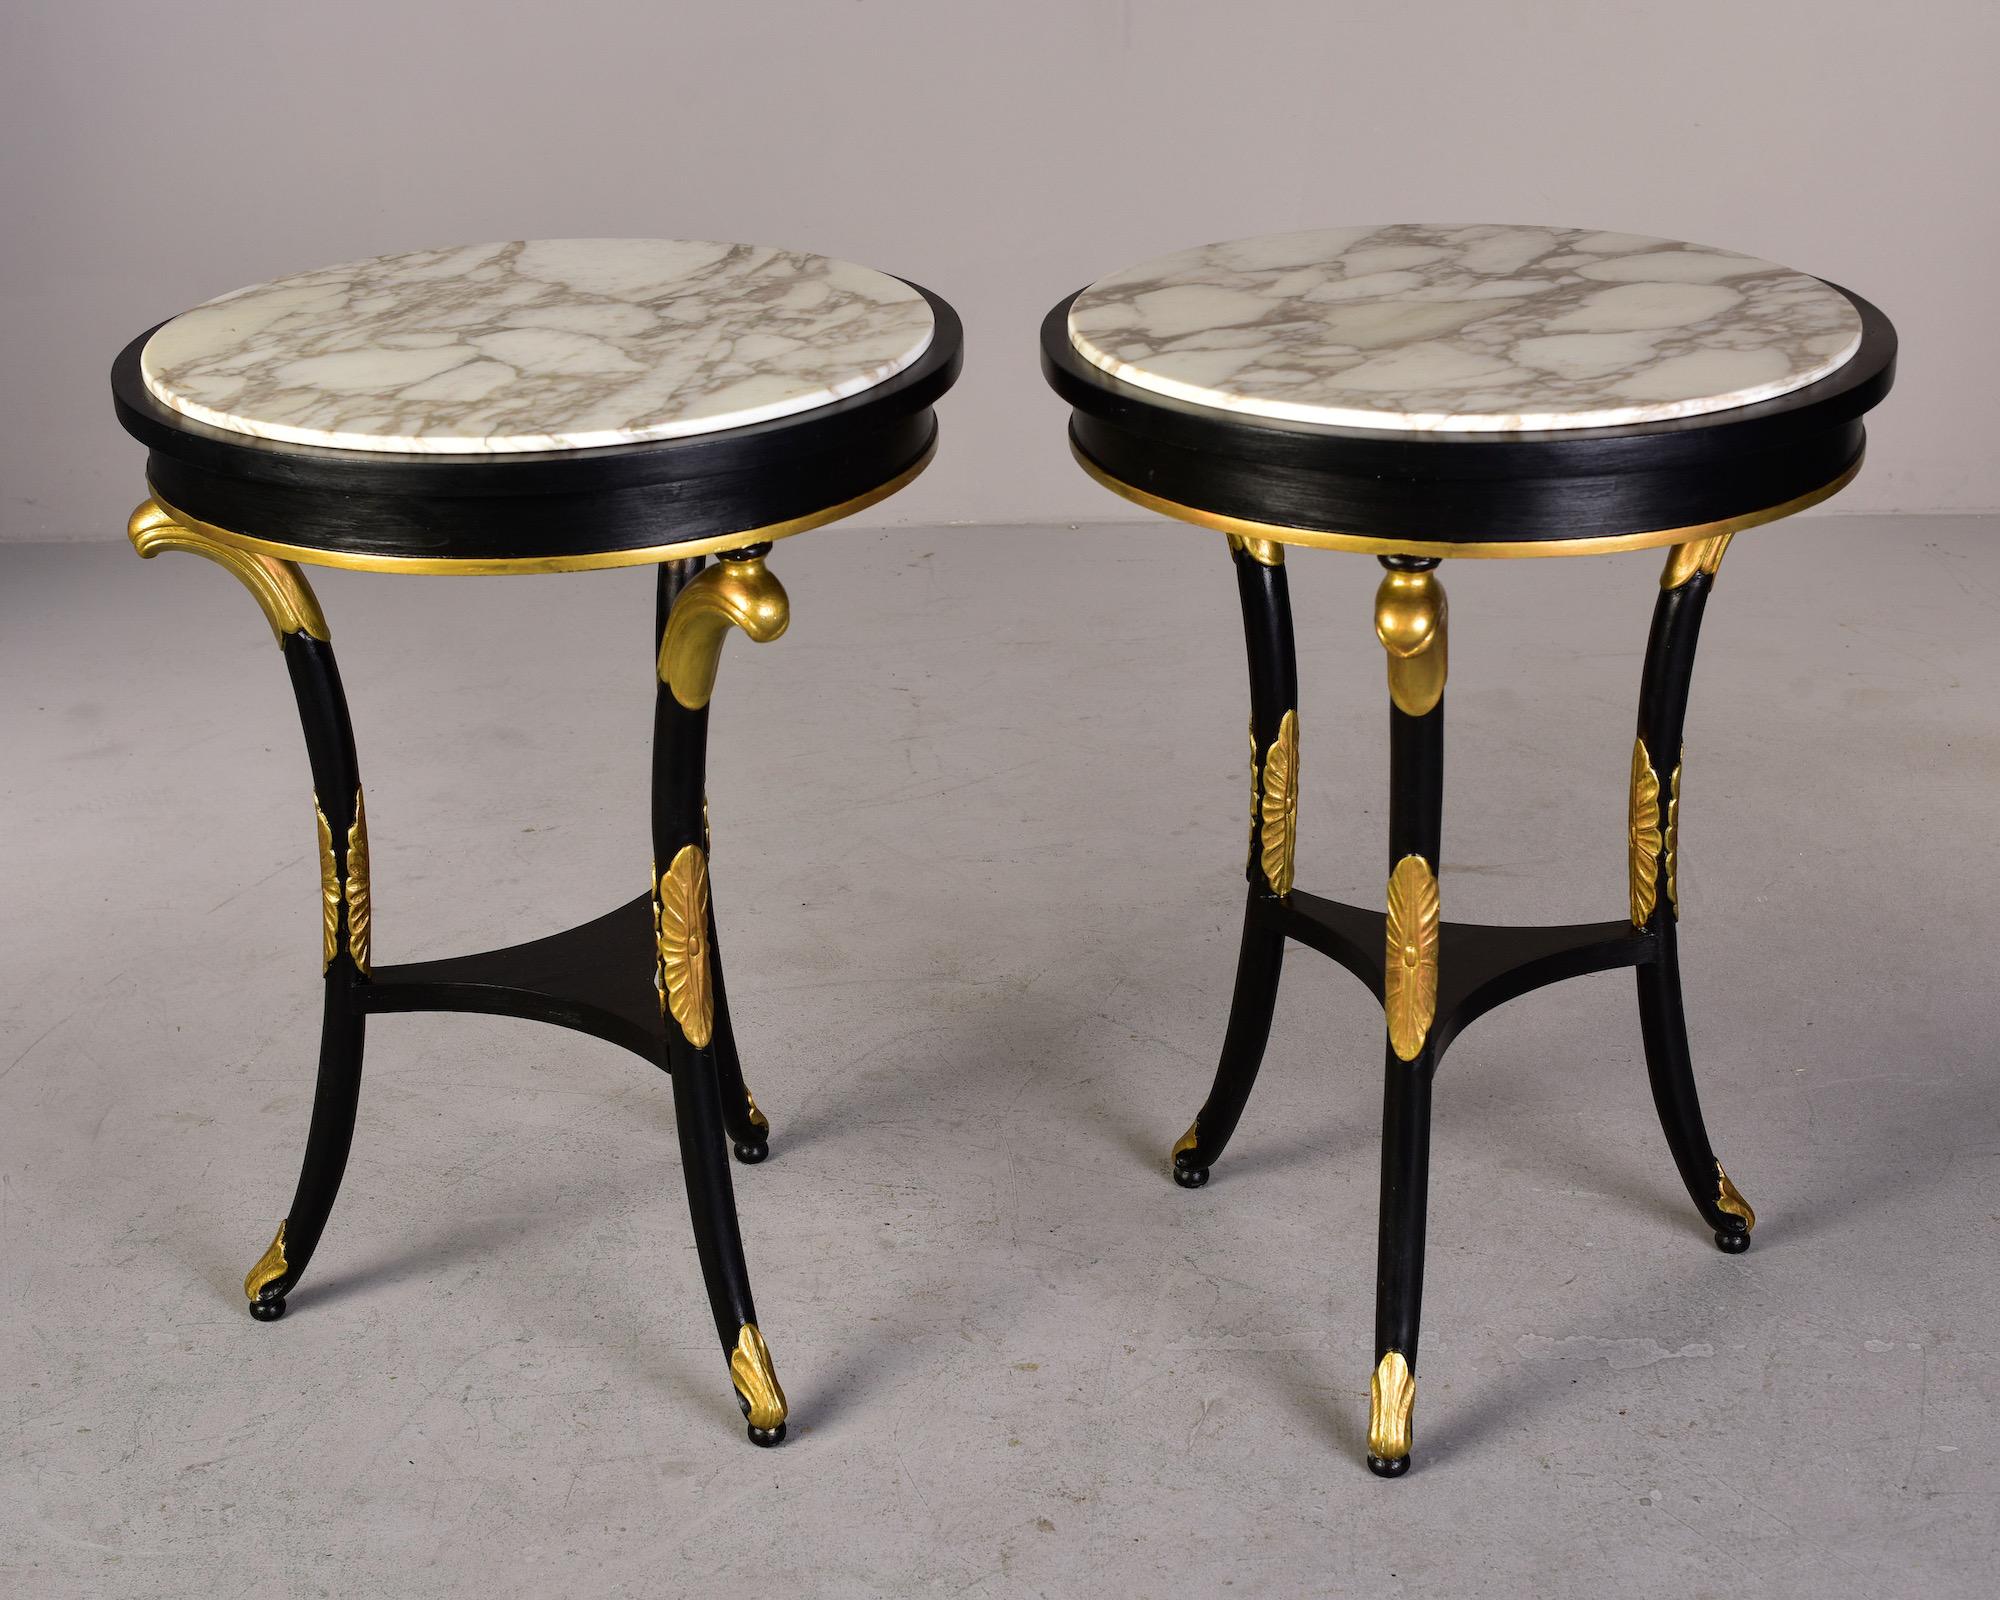 Pair Late 19th C Regency Ebonised Tables with Gilt Wood Fittings and Marble Tops For Sale 4